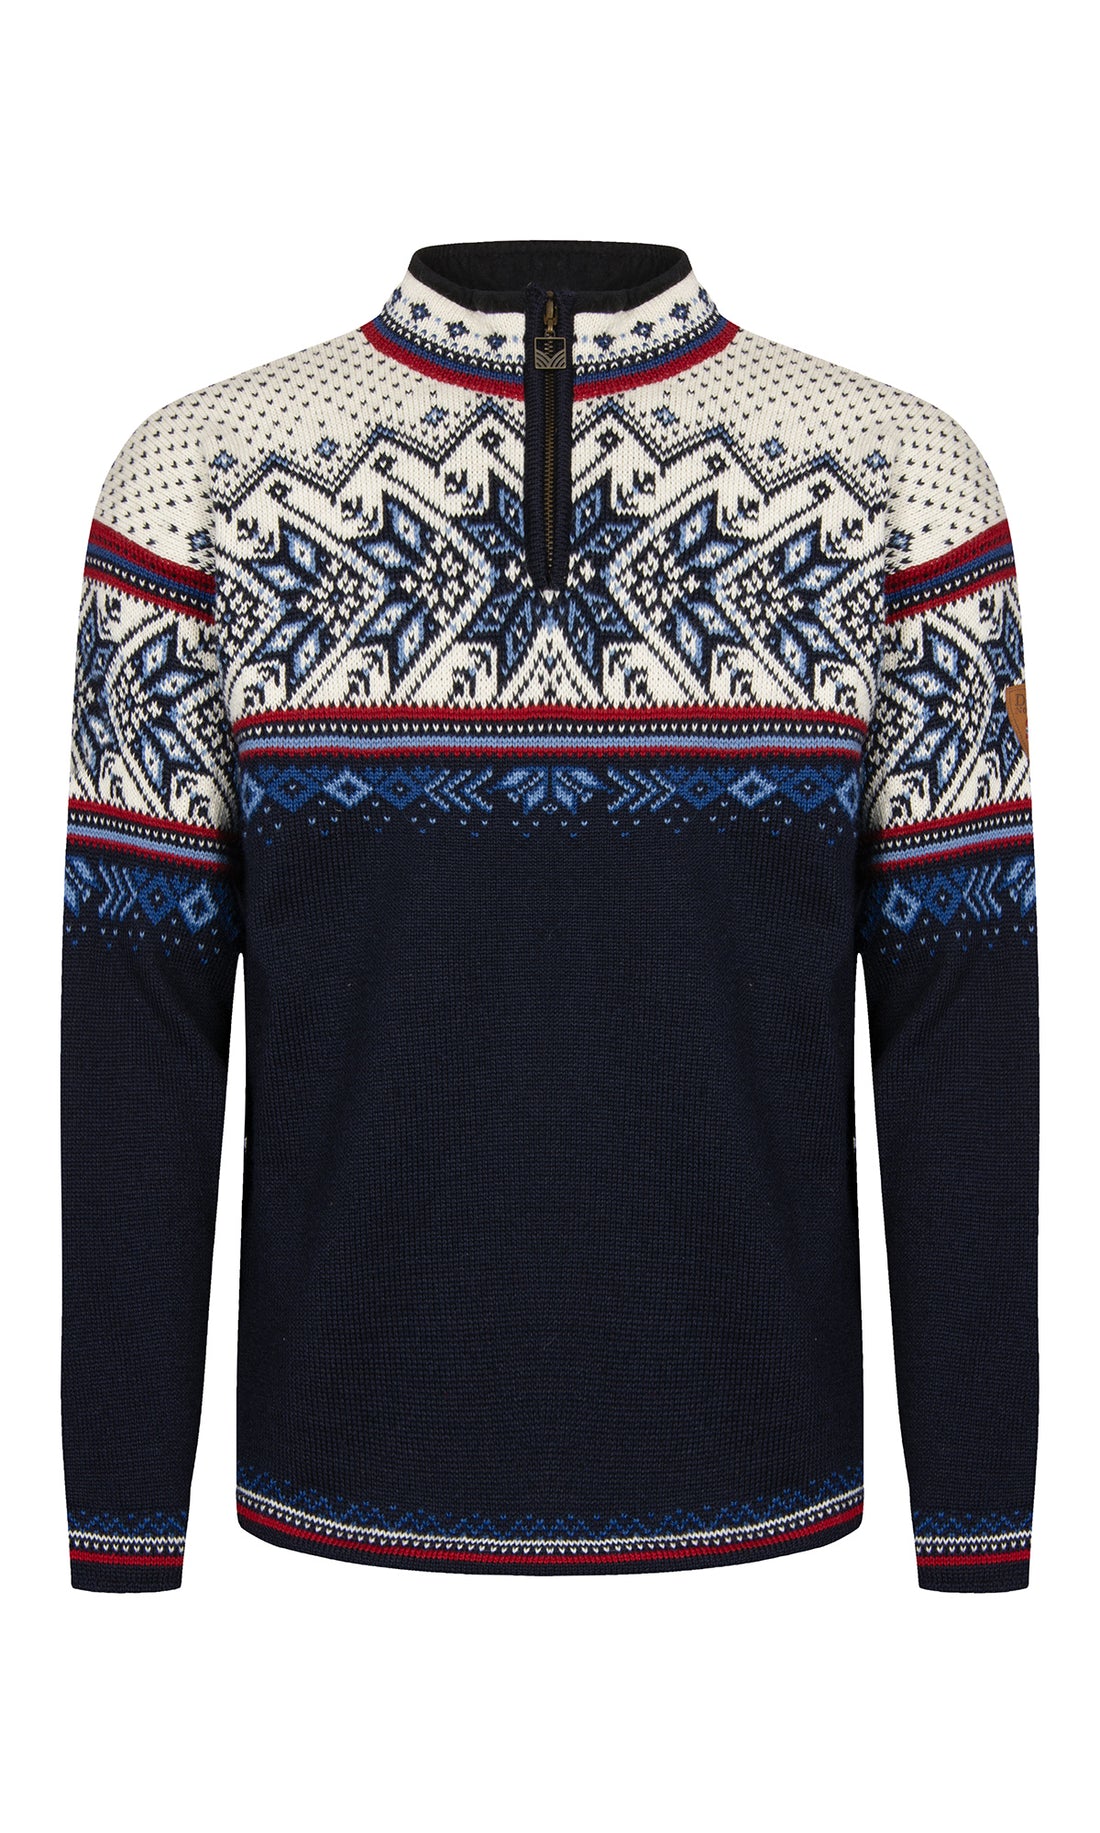 Dale of Norway- Vail Unisex Sweater 